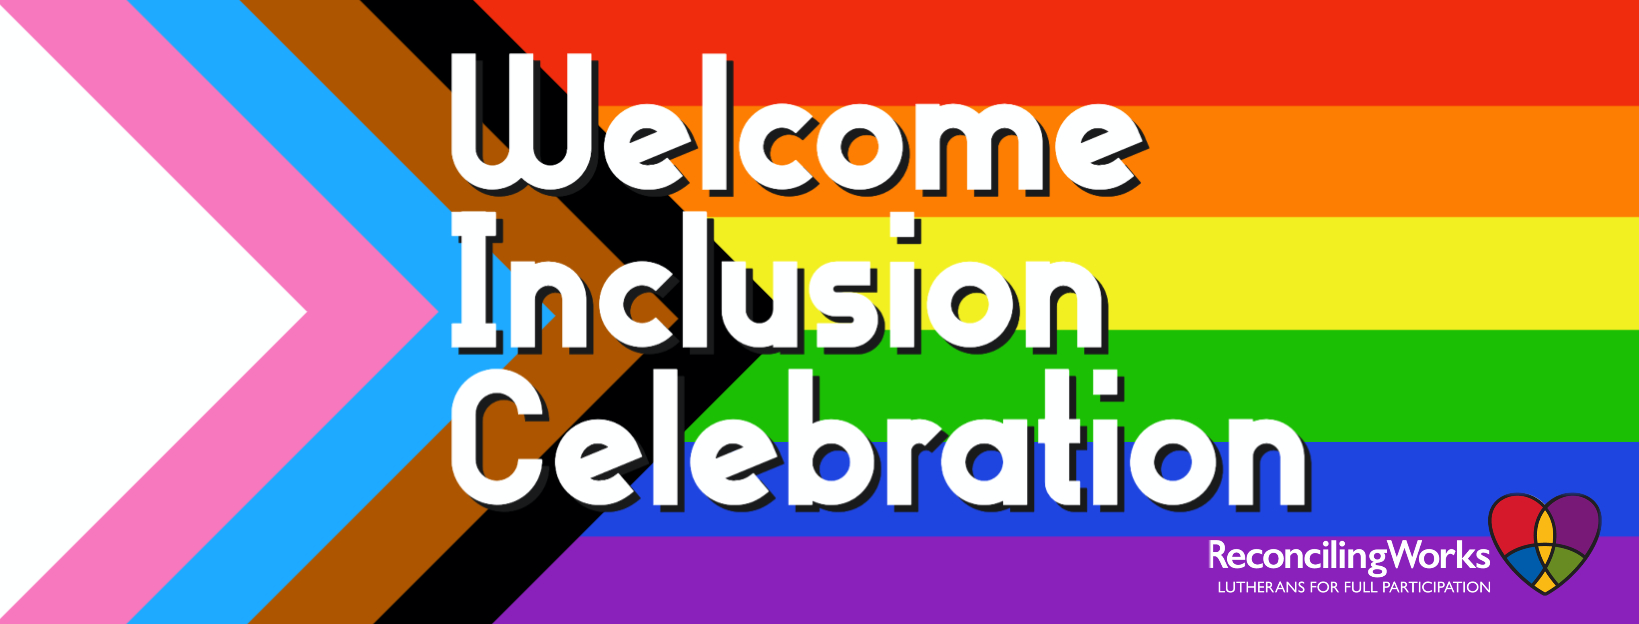 Welcome Inclusion Celebration